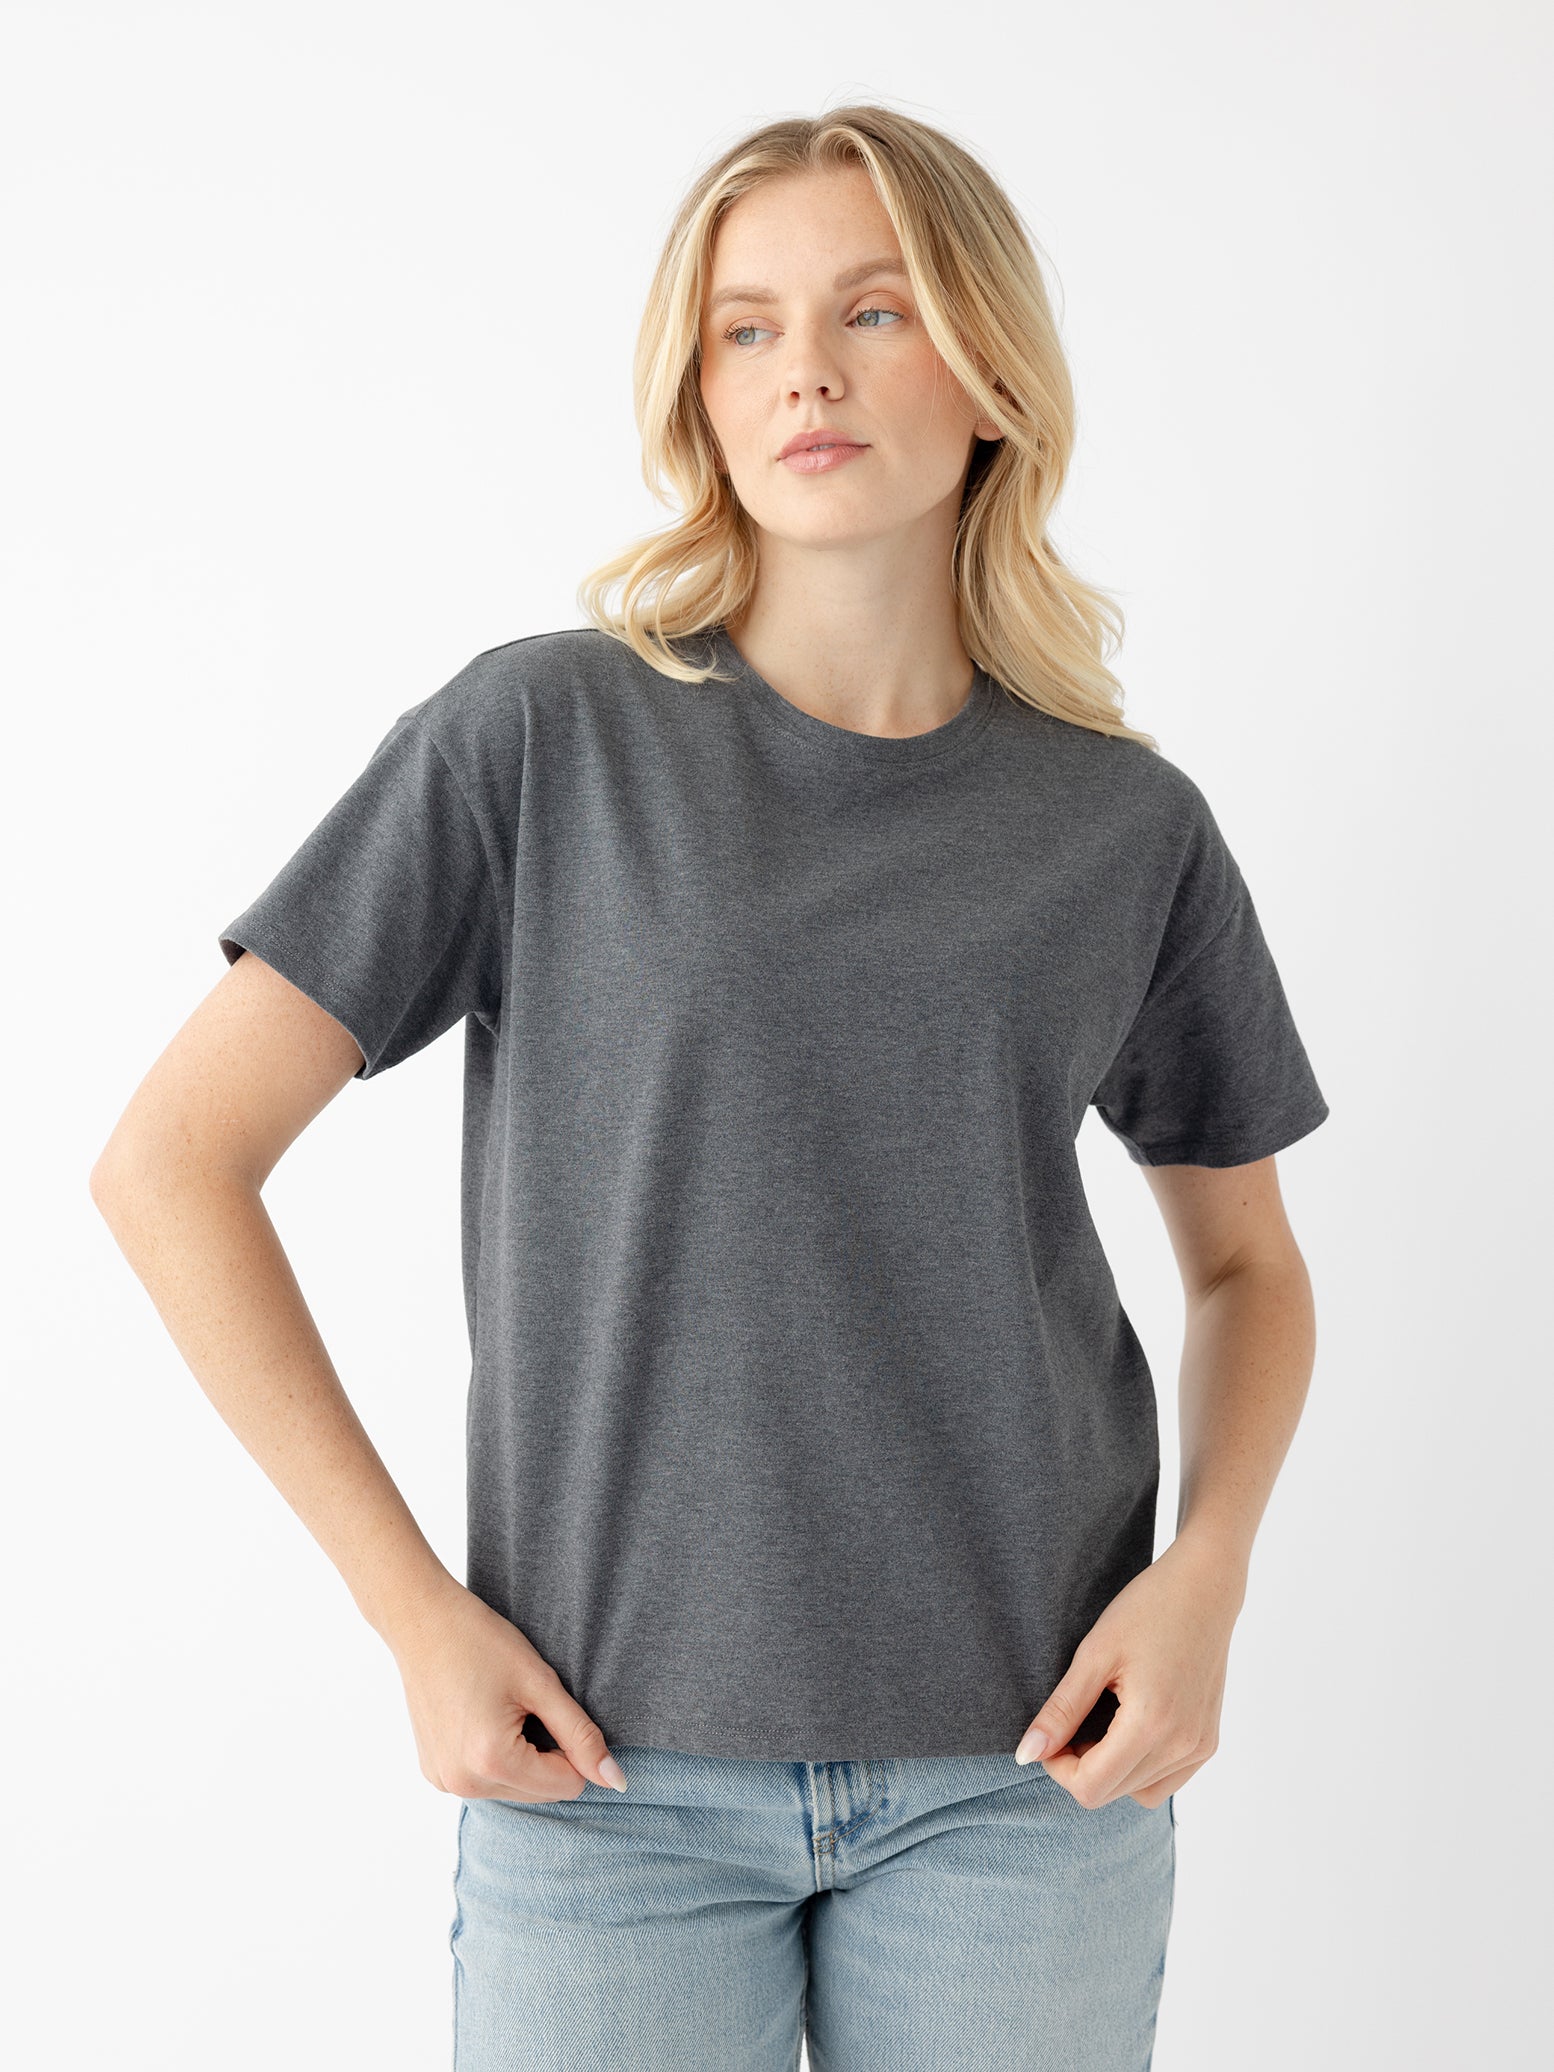 Woman wearing coal heather tee with white background 